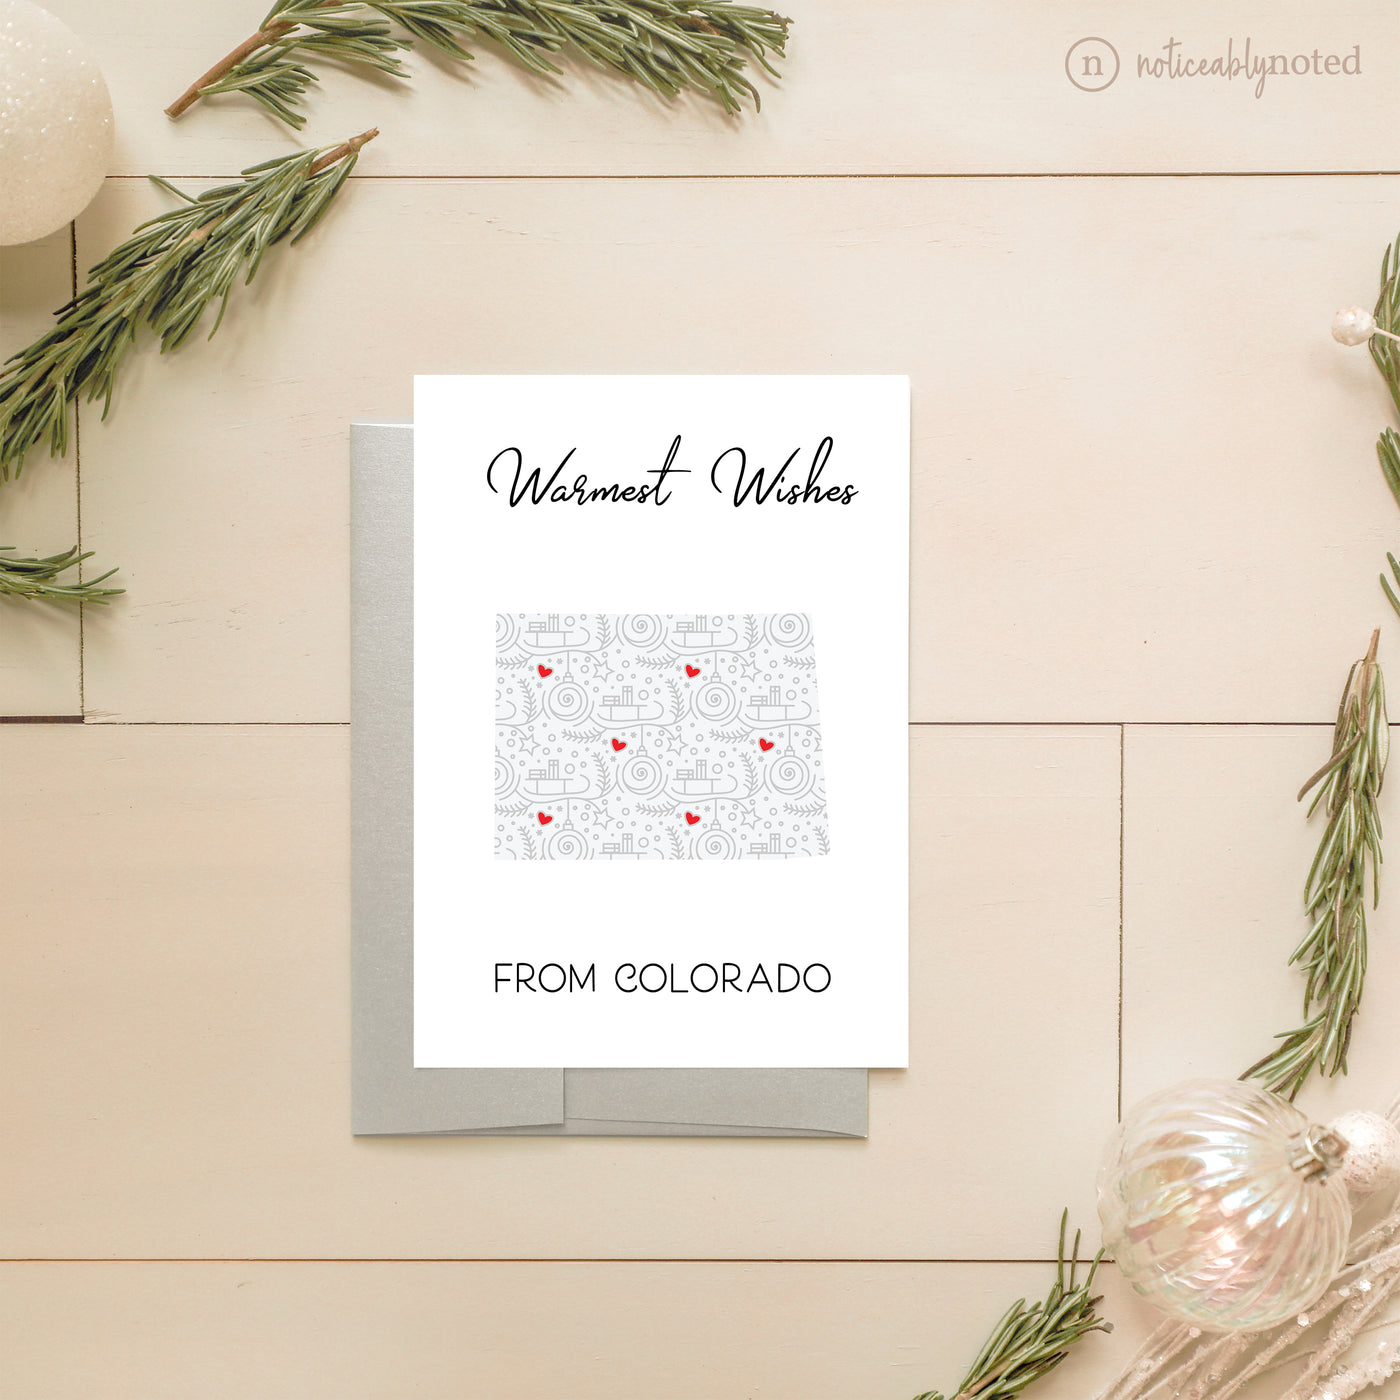 CO Holiday Greeting Cards | Noticeably Noted